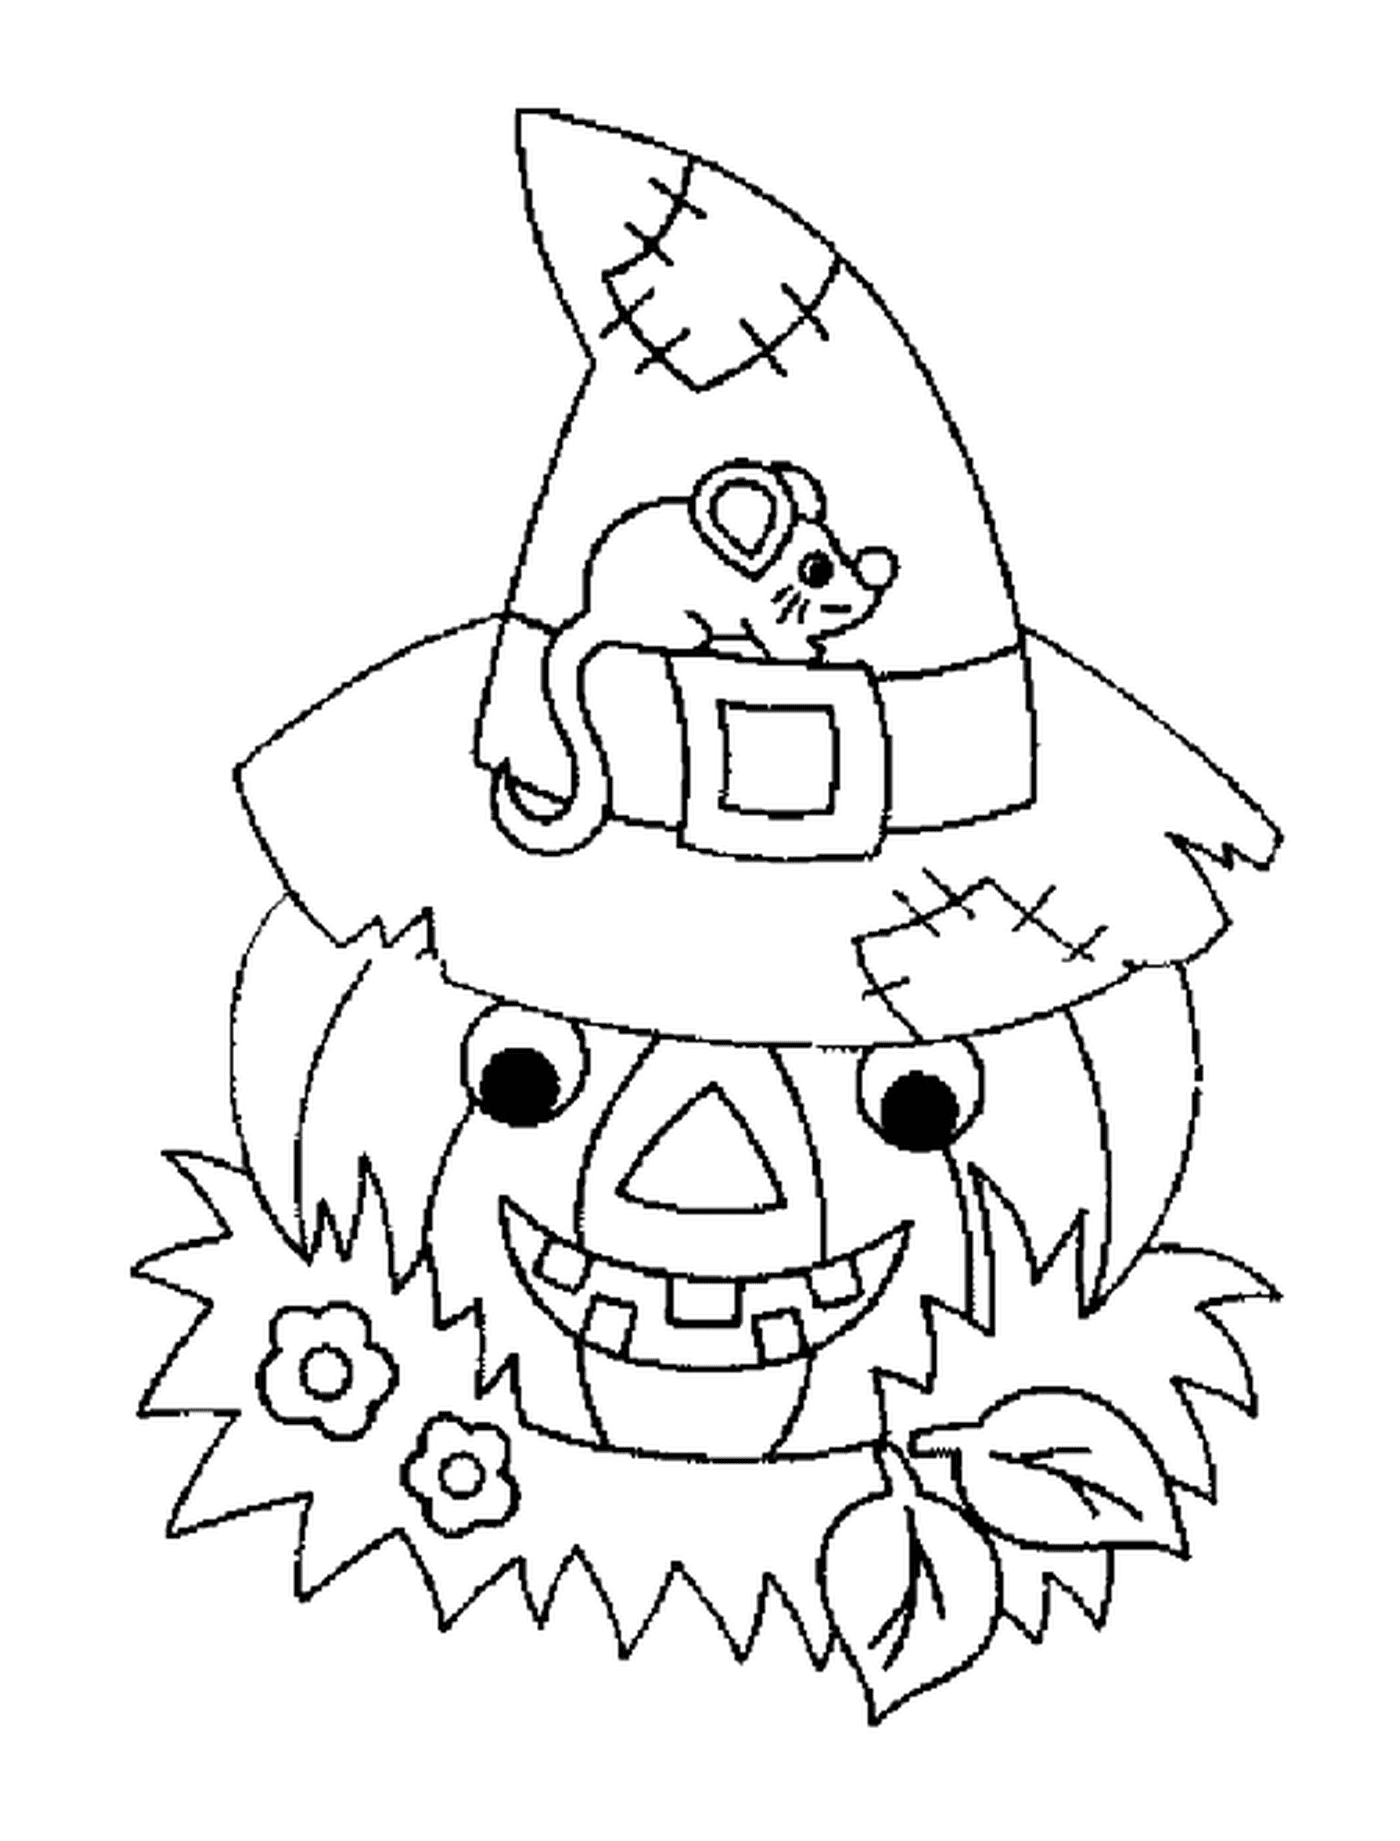  A scarecrow wearing a hat and a mouse 